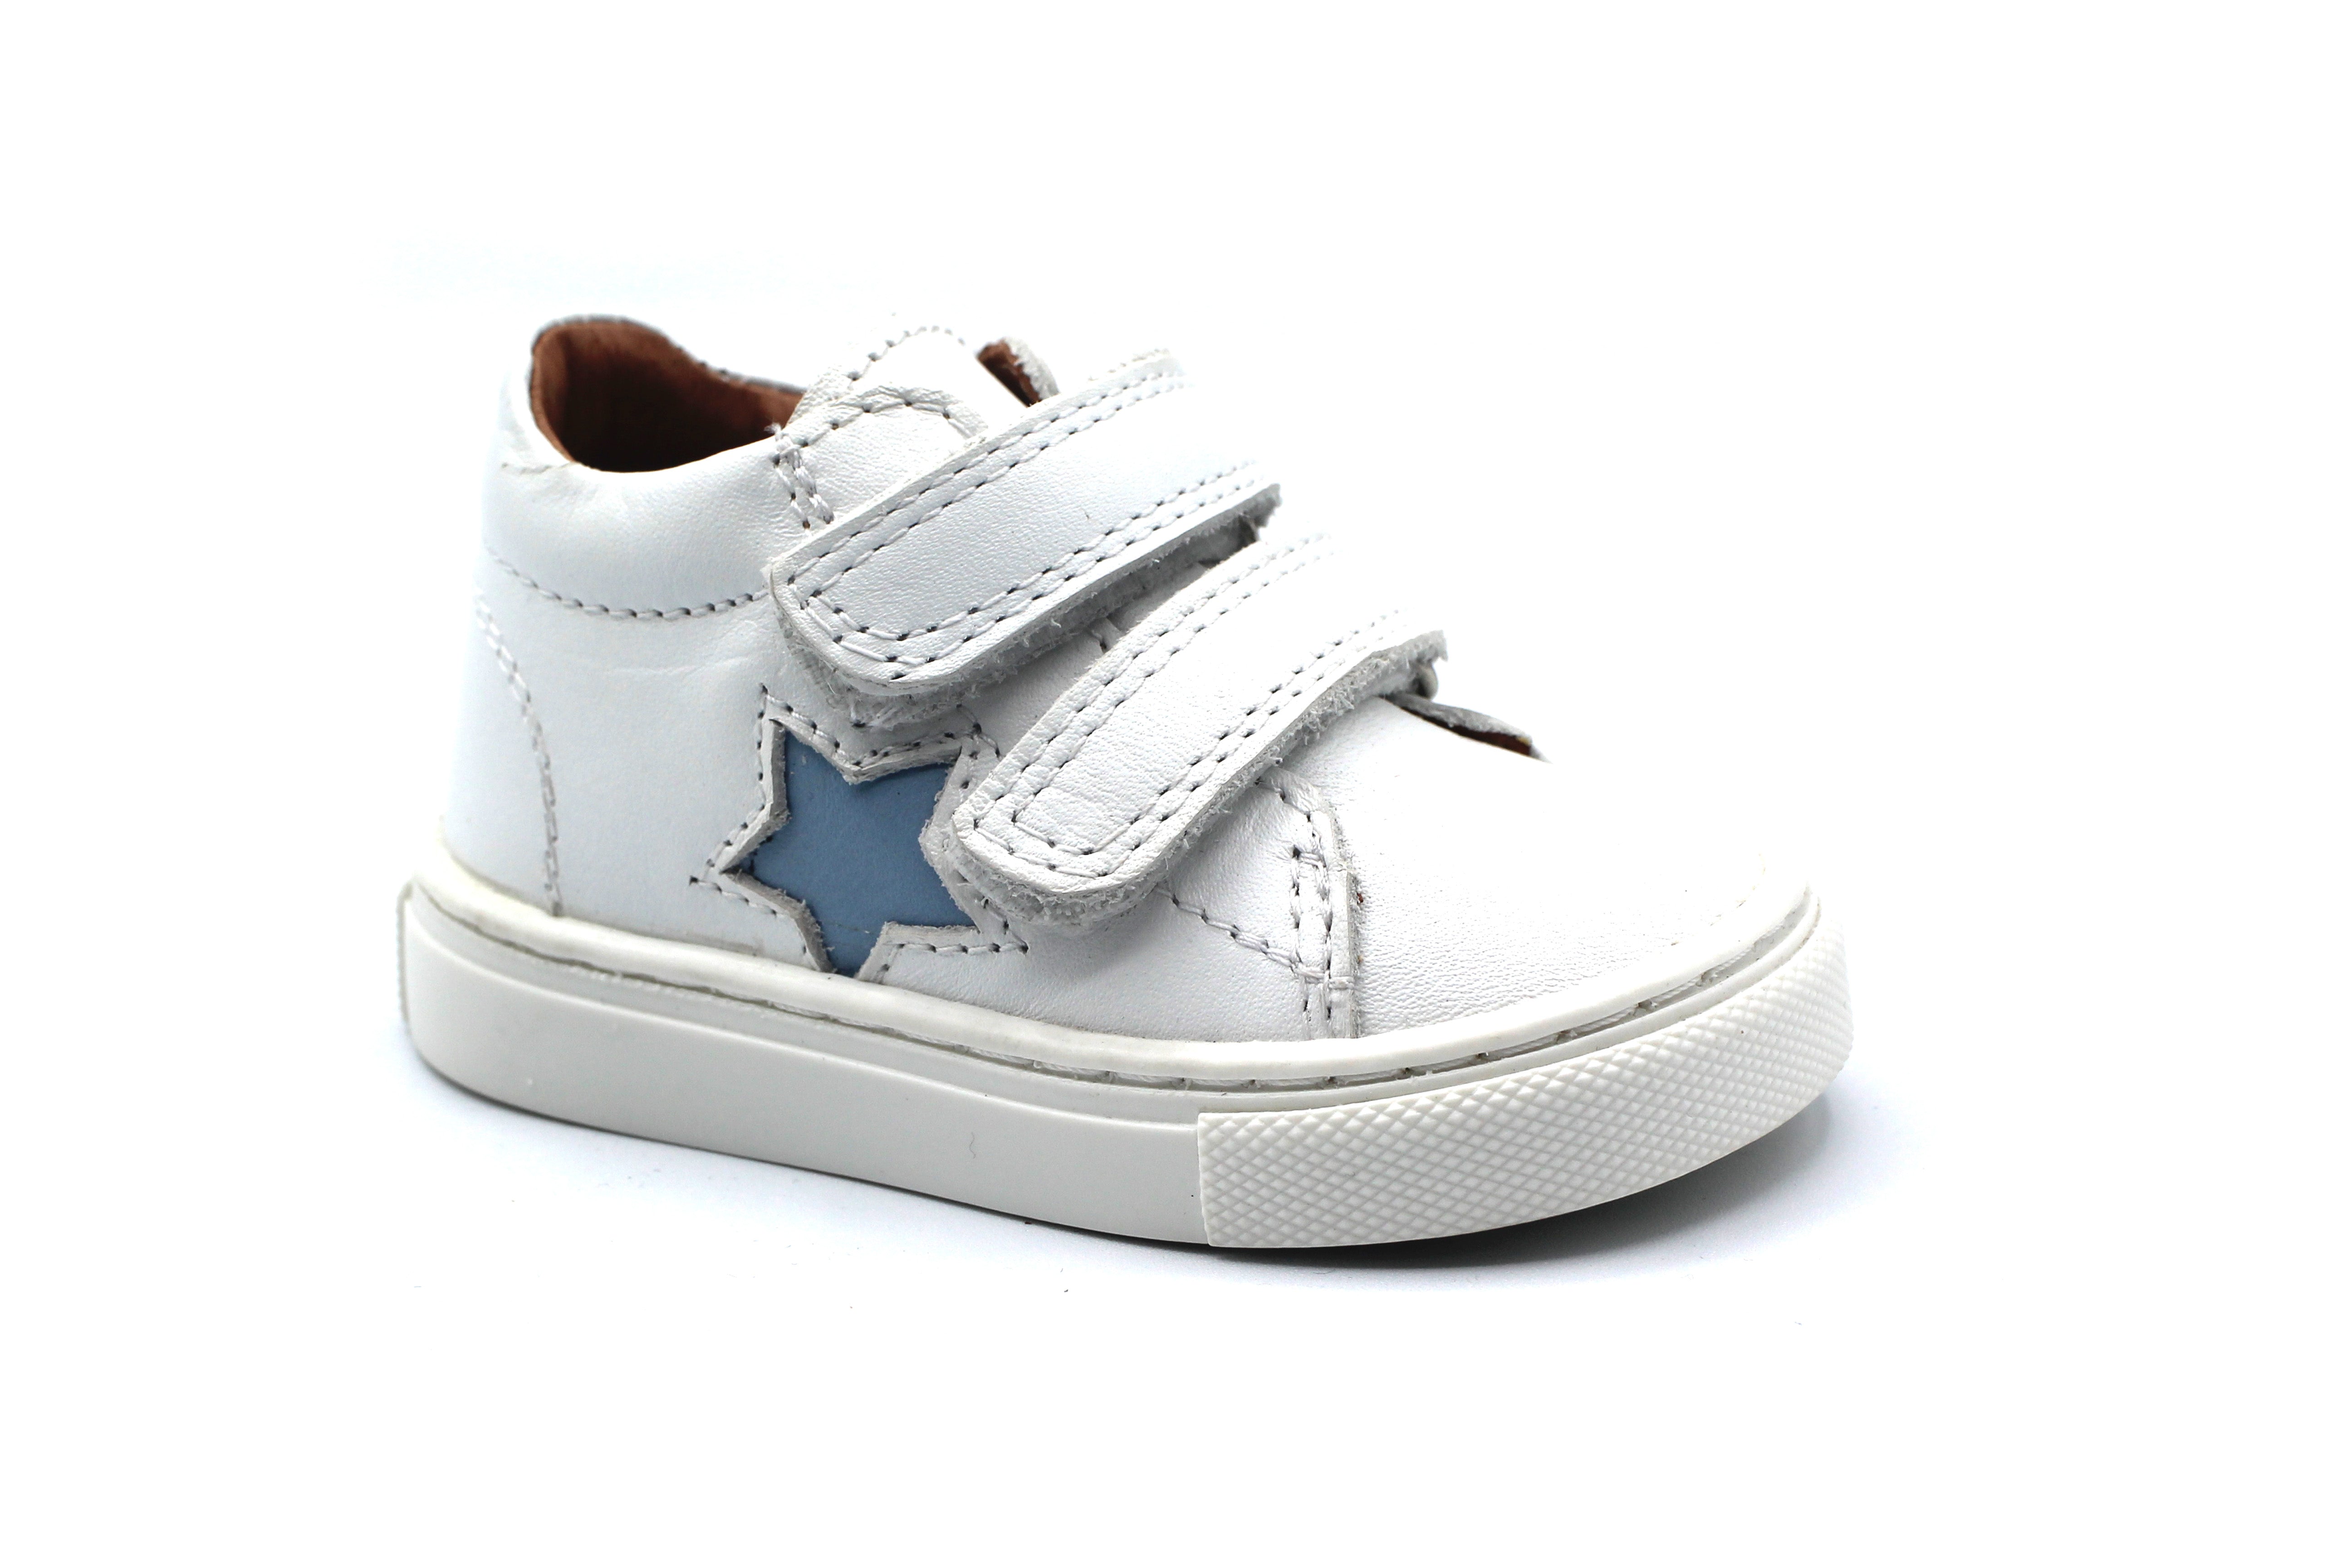 Star Child Sky Blue Sneakers